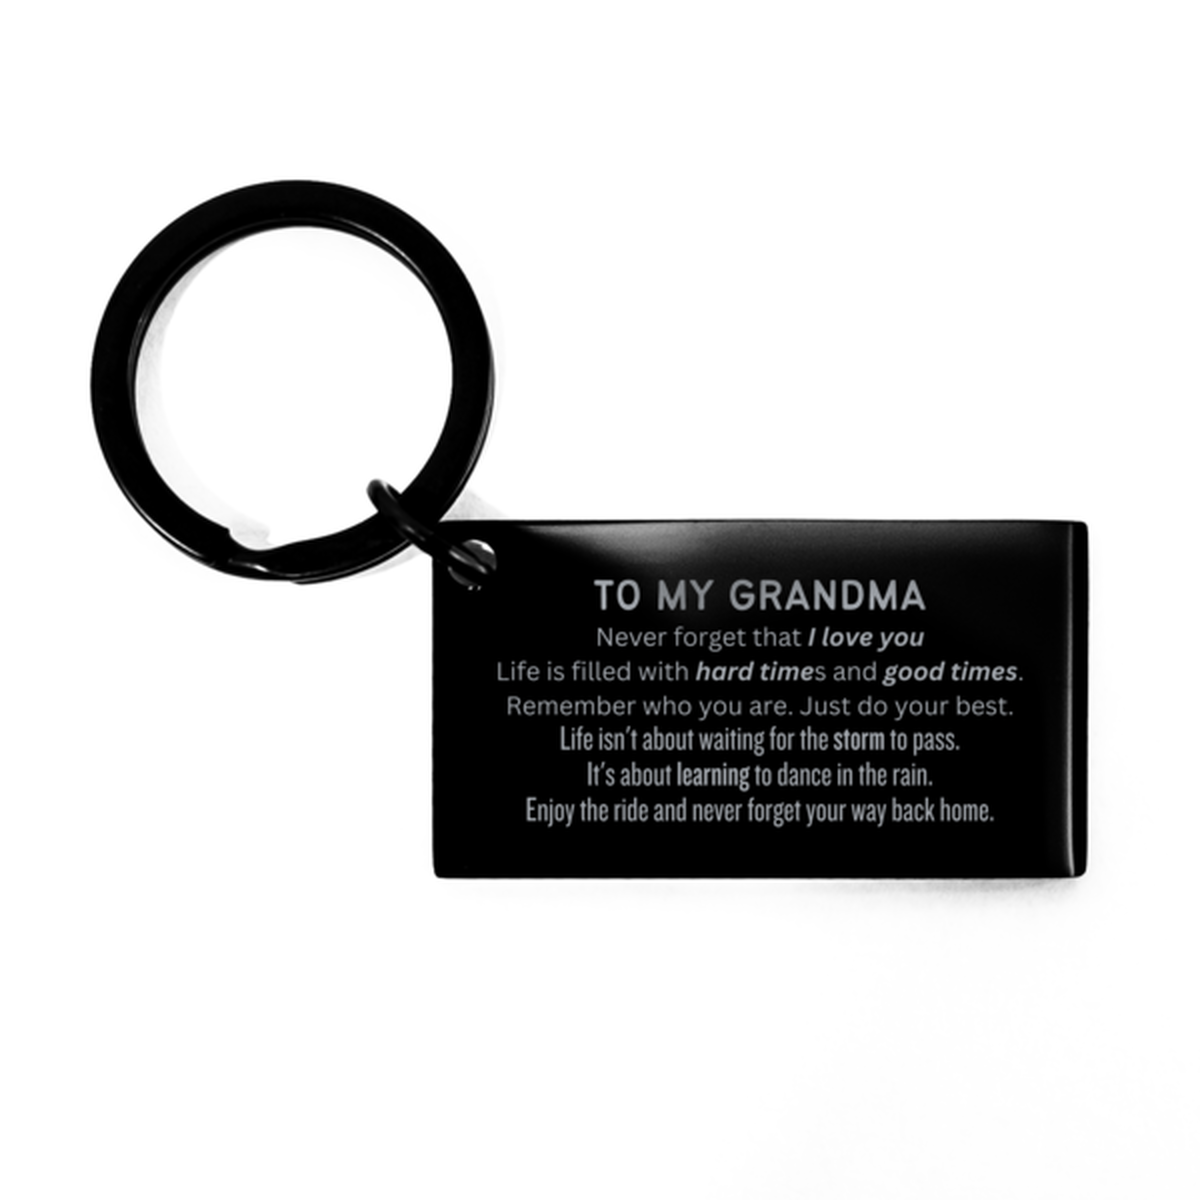 Christmas Grandma Keychain Gifts, To My Grandma Birthday Thank You Gifts For Grandma, Graduation Unique Gifts For Grandma To My Grandma Never forget that I love you life is filled with hard times and good times. Remember who you are. Just do your best